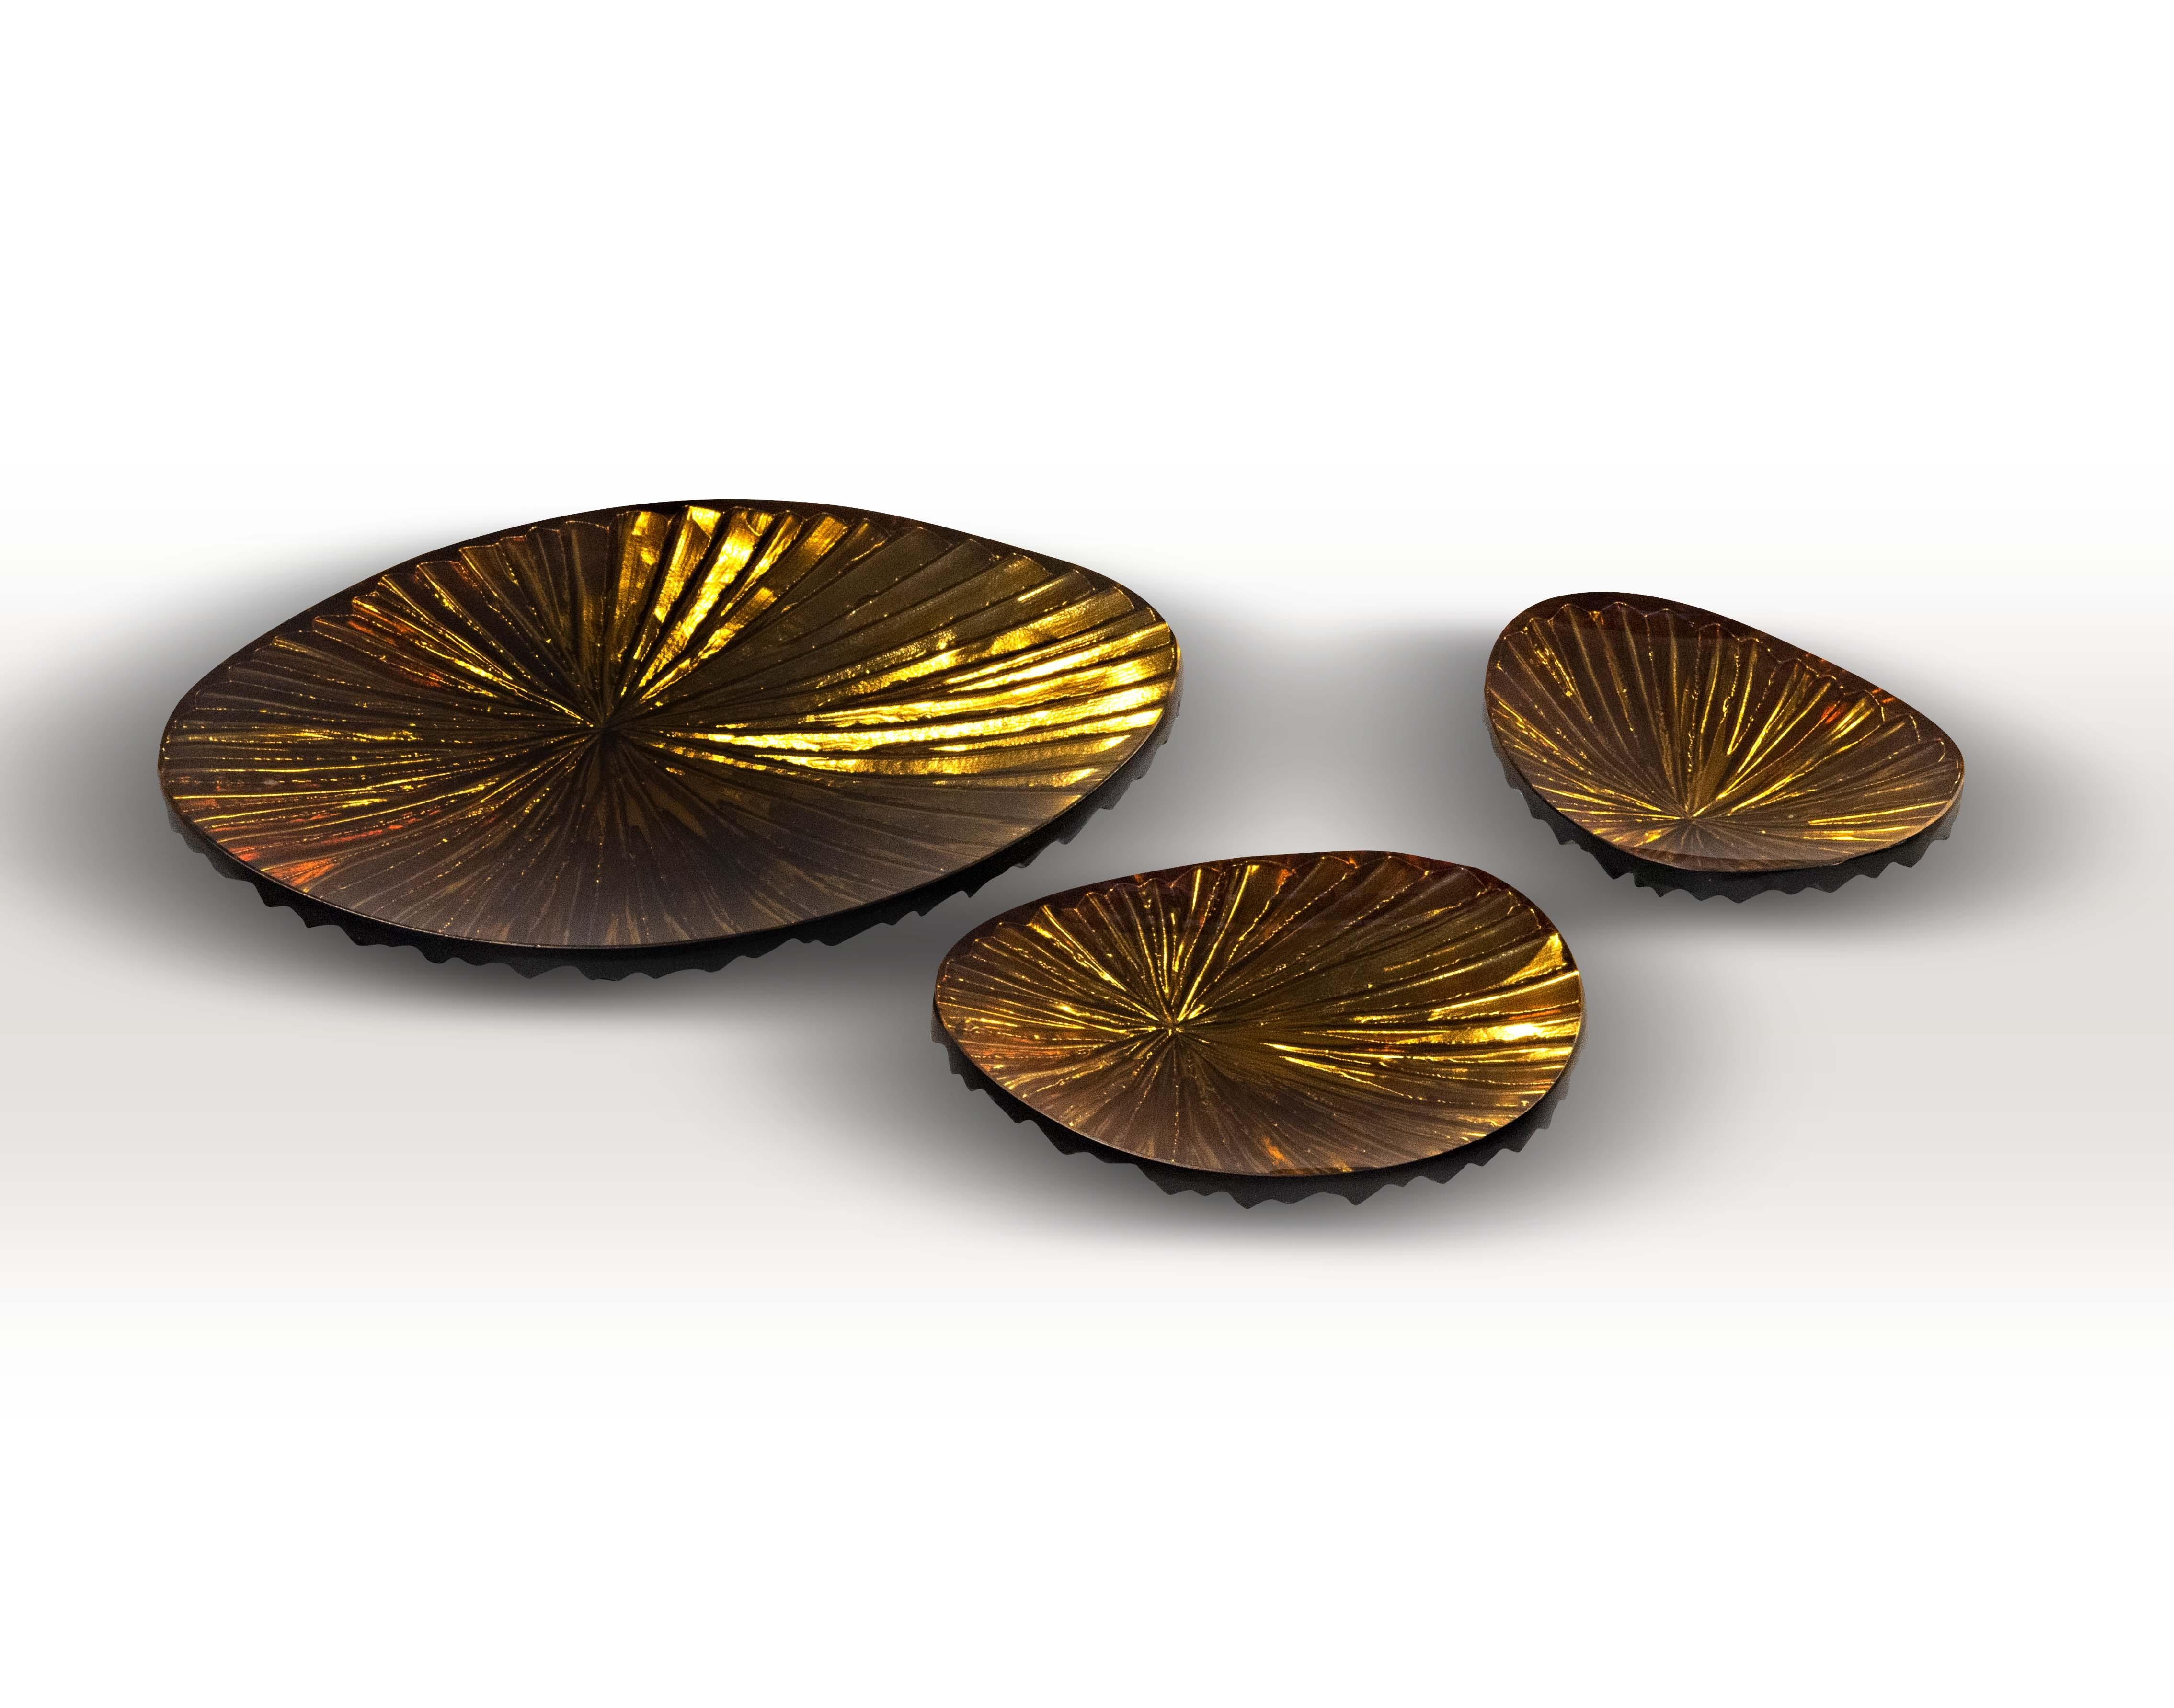 Italian Contemporary 'Oasi' Bowl Amber and Gold Crystal Small Size by Ghirò Studio For Sale